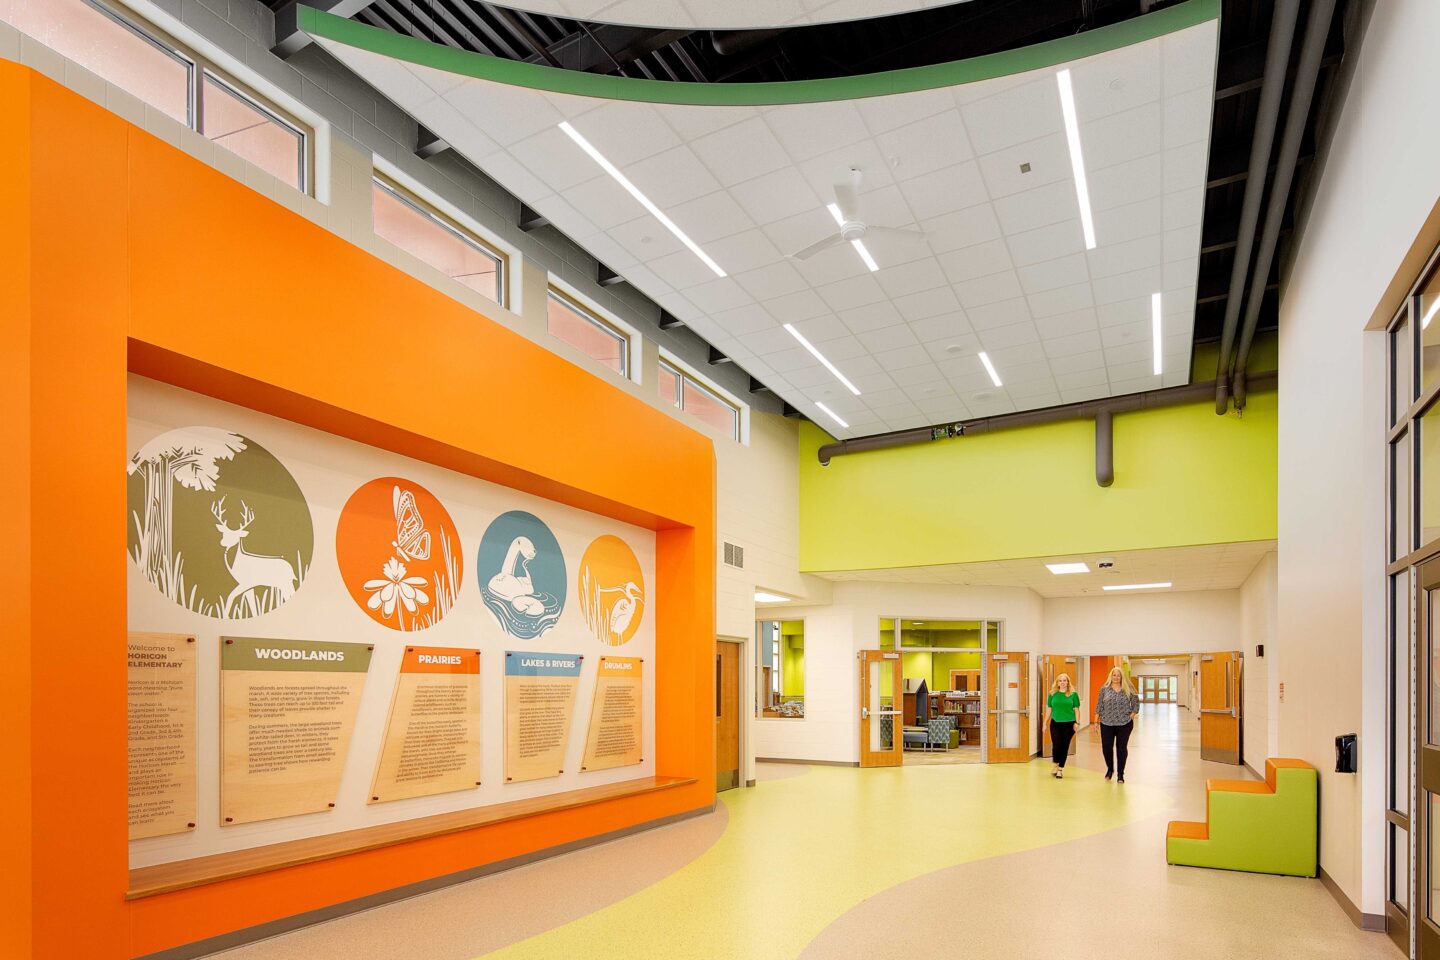 An open and brightly colored school hallway with a wall mural featuring natural elements